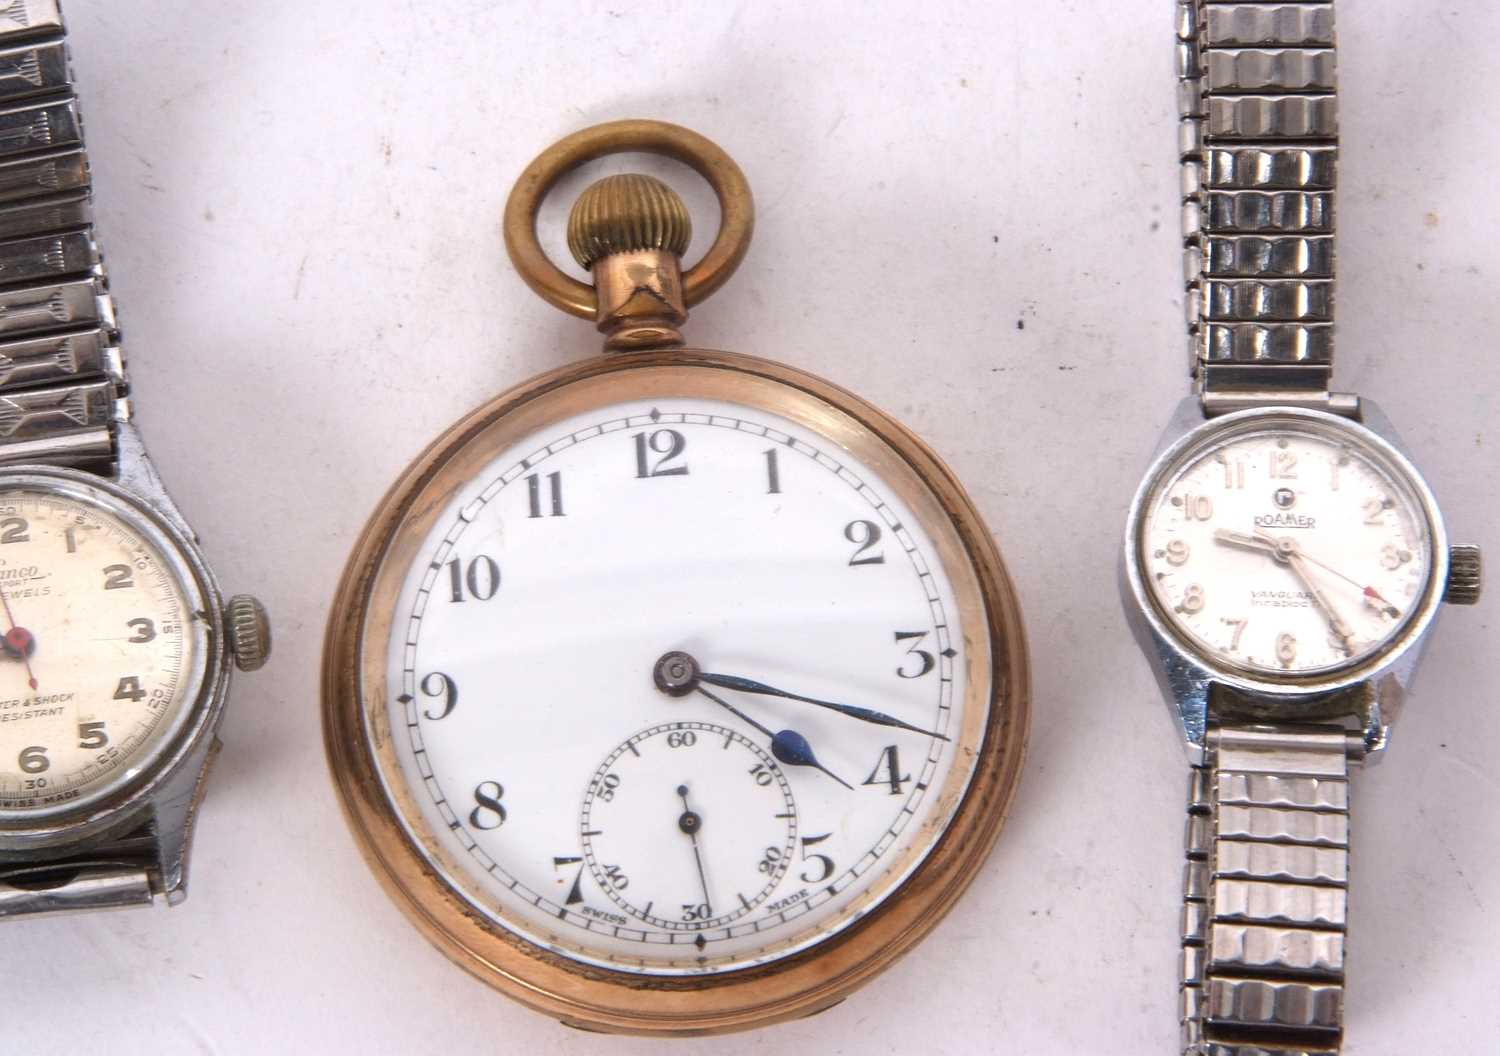 Mixed Lot: Two wristwatches and a rolled gold pocket watch, the wristwatches are a ladies Roma and a - Image 3 of 4